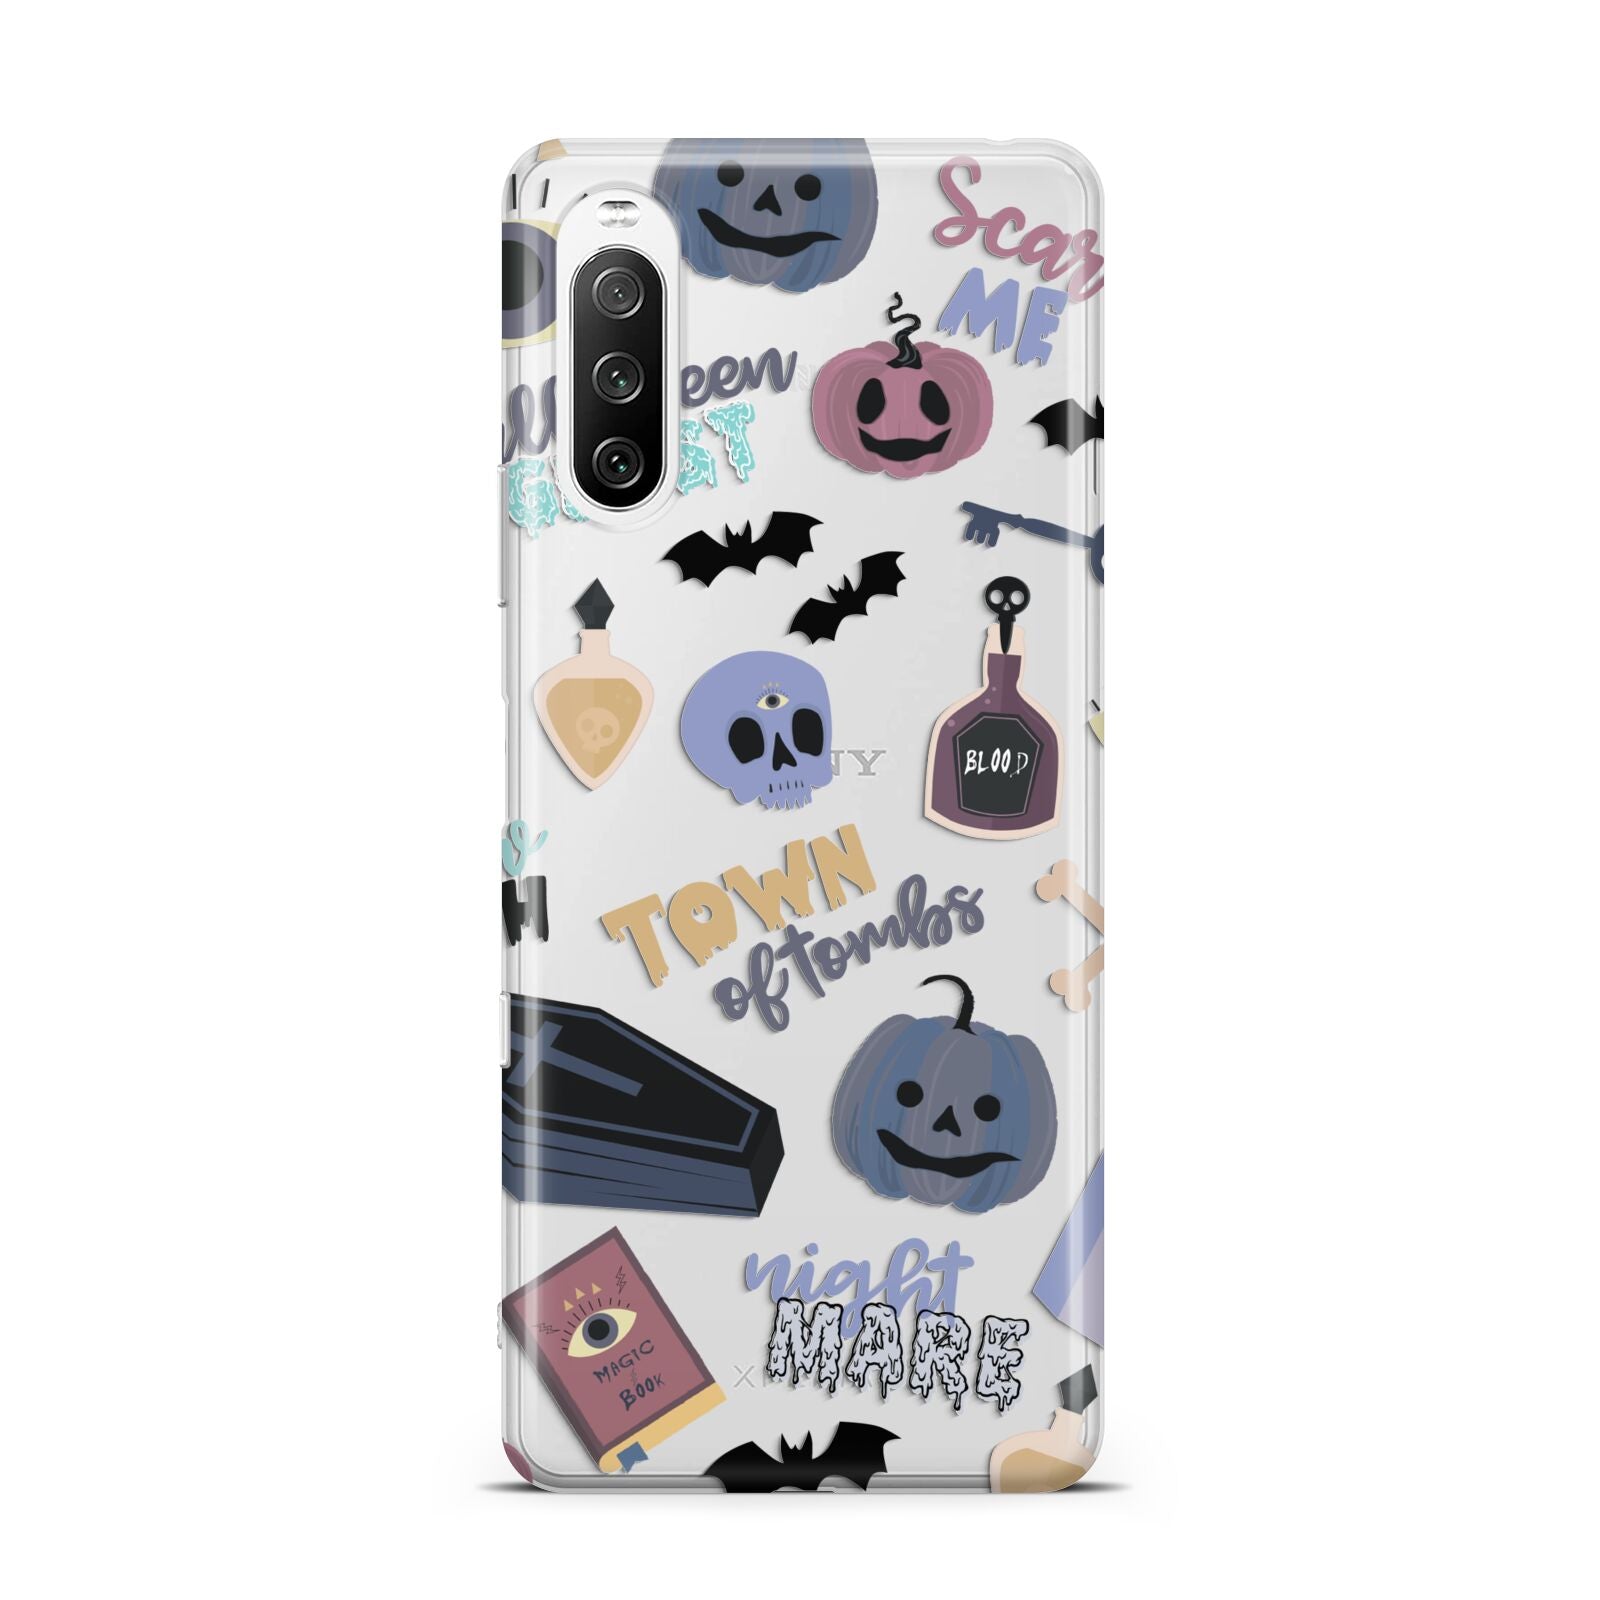 Spooky Blue Illustrations and Catchphrases Sony Xperia 10 III Case